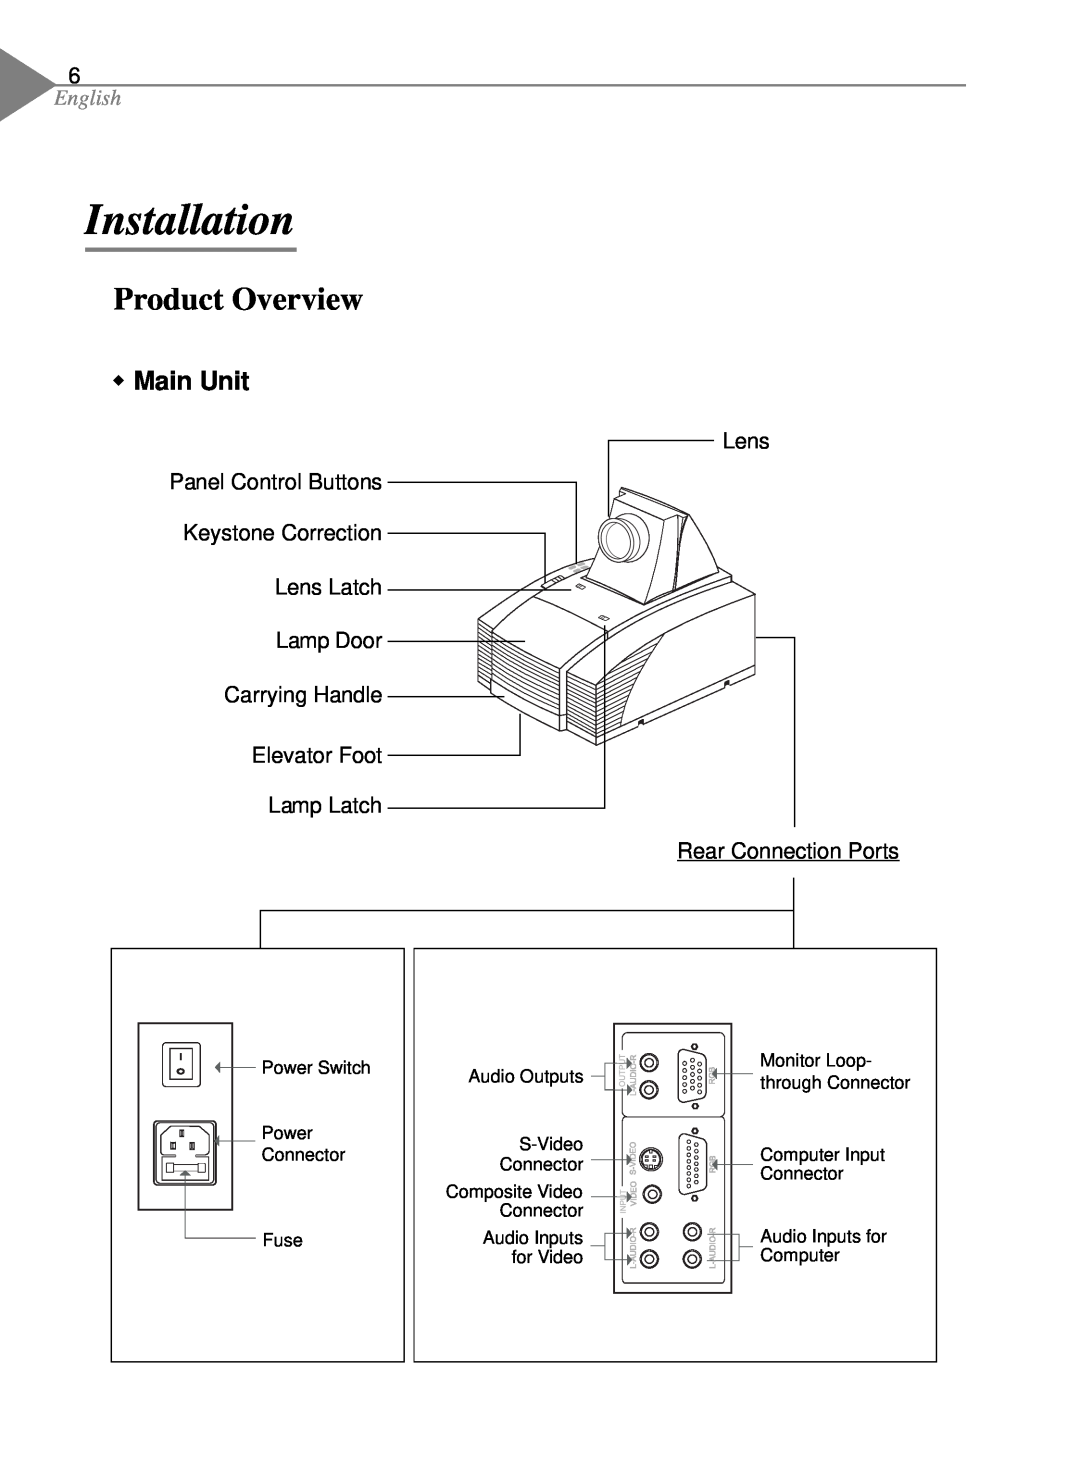 Optoma Technology EP550 specifications Installation, Product Overview, w Main Unit, English 